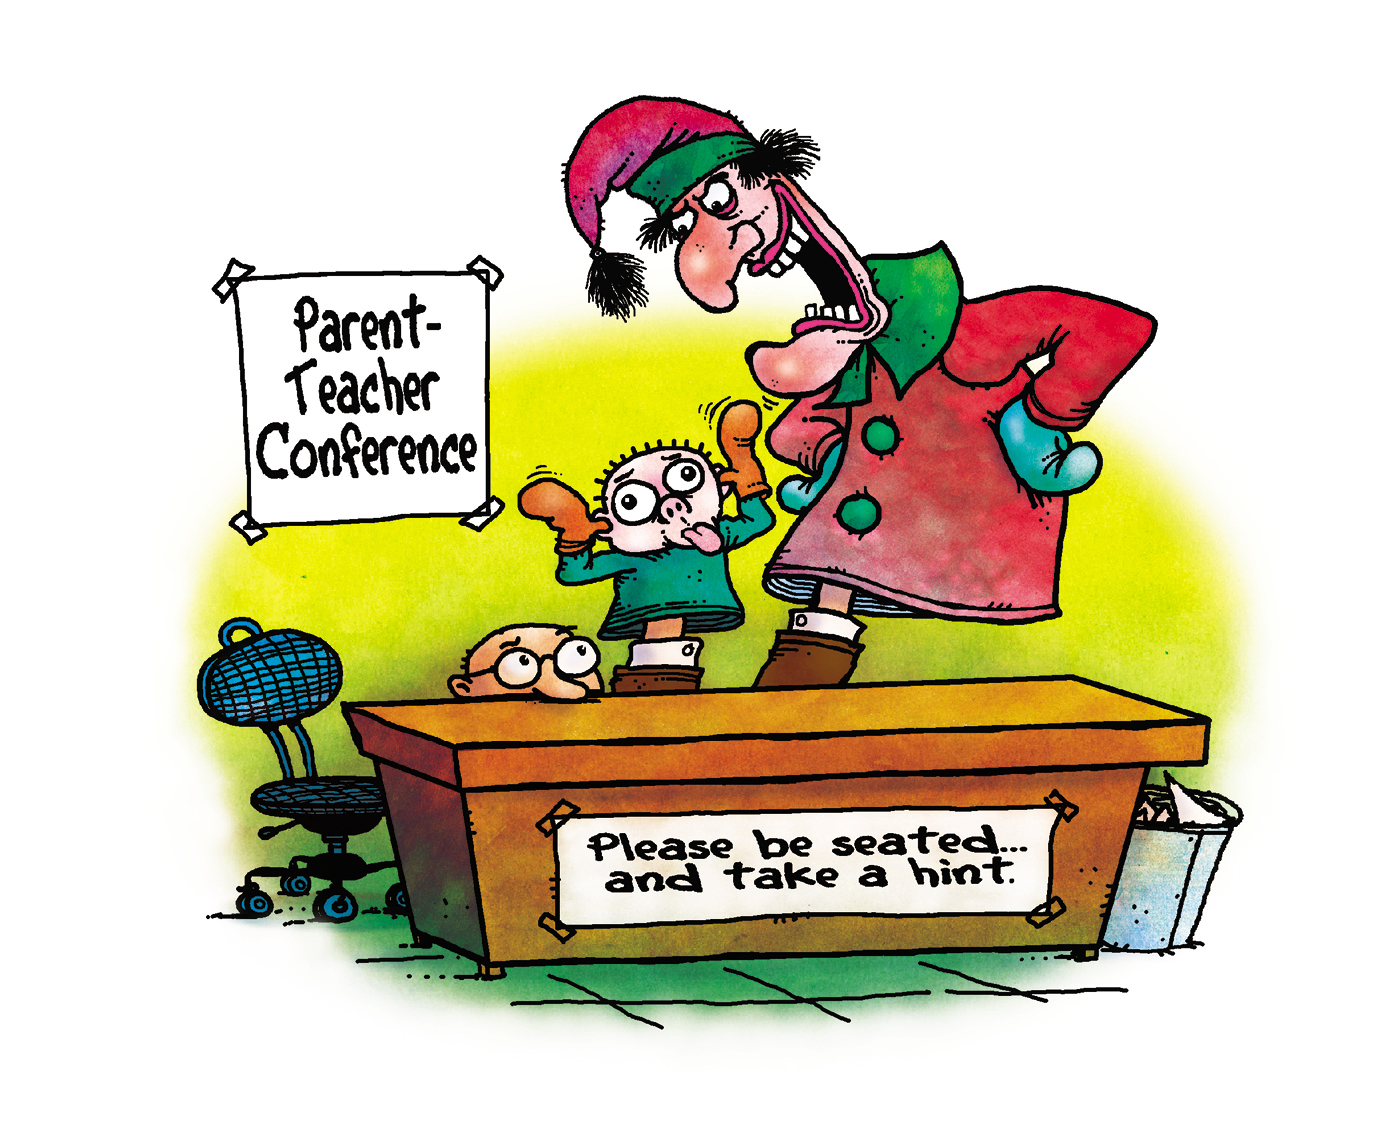 An illustration showing puppets popping out of a desk and a parent teacher conference sign in the back